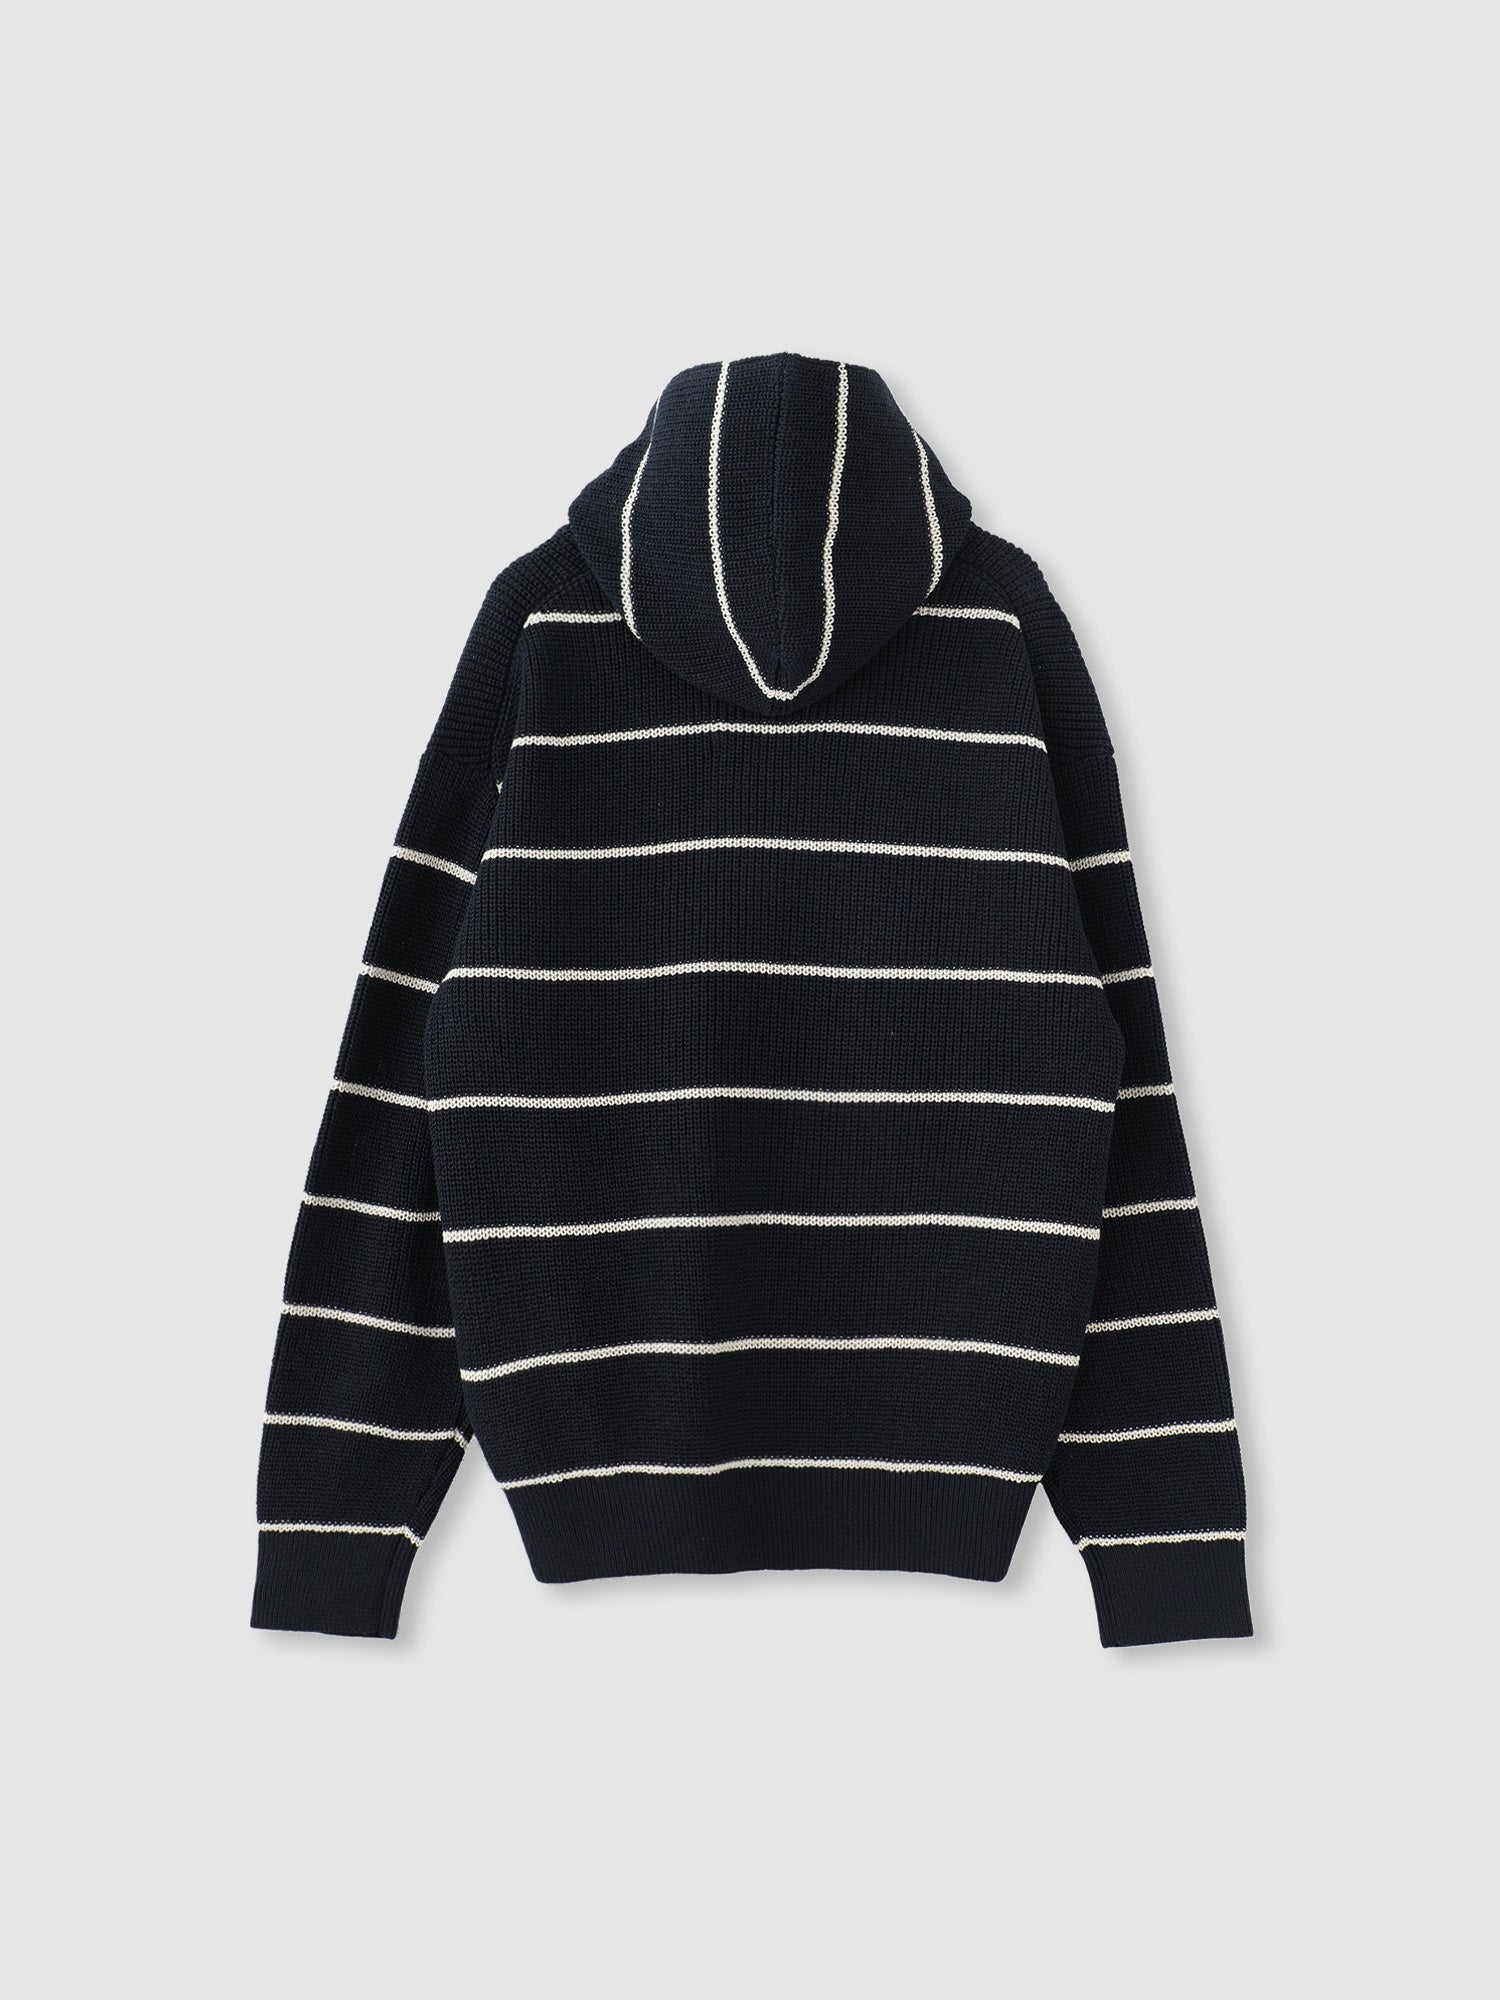 CT COLLAB STRIPED HOODY